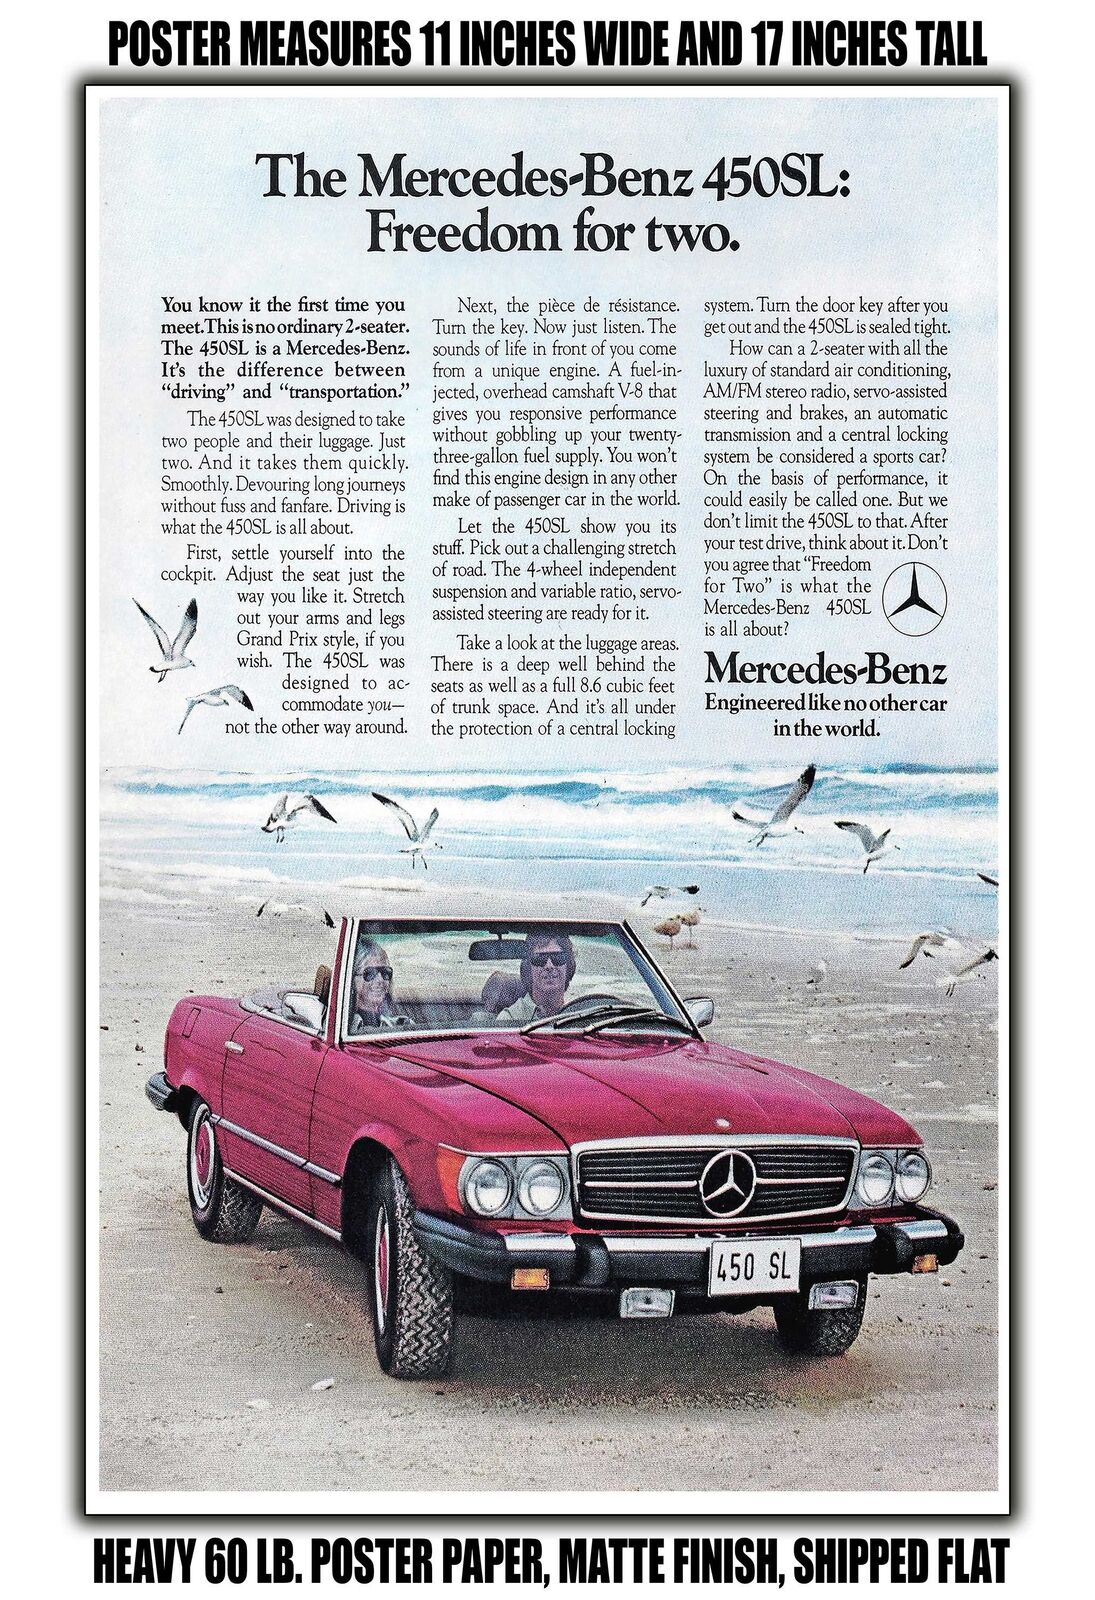 11x17 POSTER - 1976 Mercedes Benz 450 SL Freedom for Two